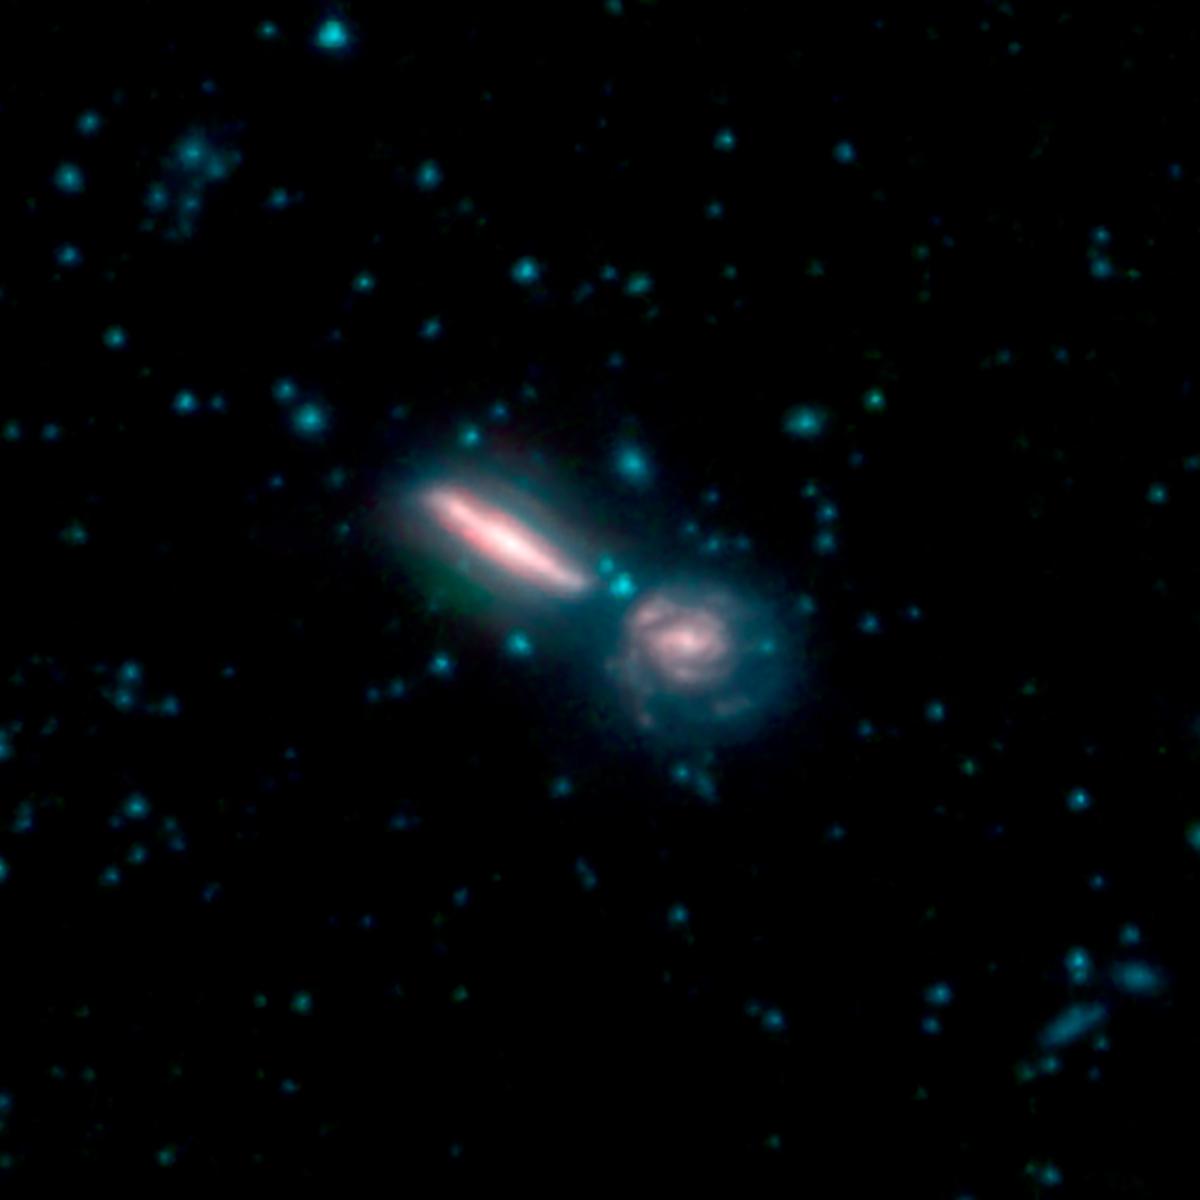 This image, by NASAs Spitzer Space Telescope, shows two merging galaxies known as Arp 302, also called VV 340.